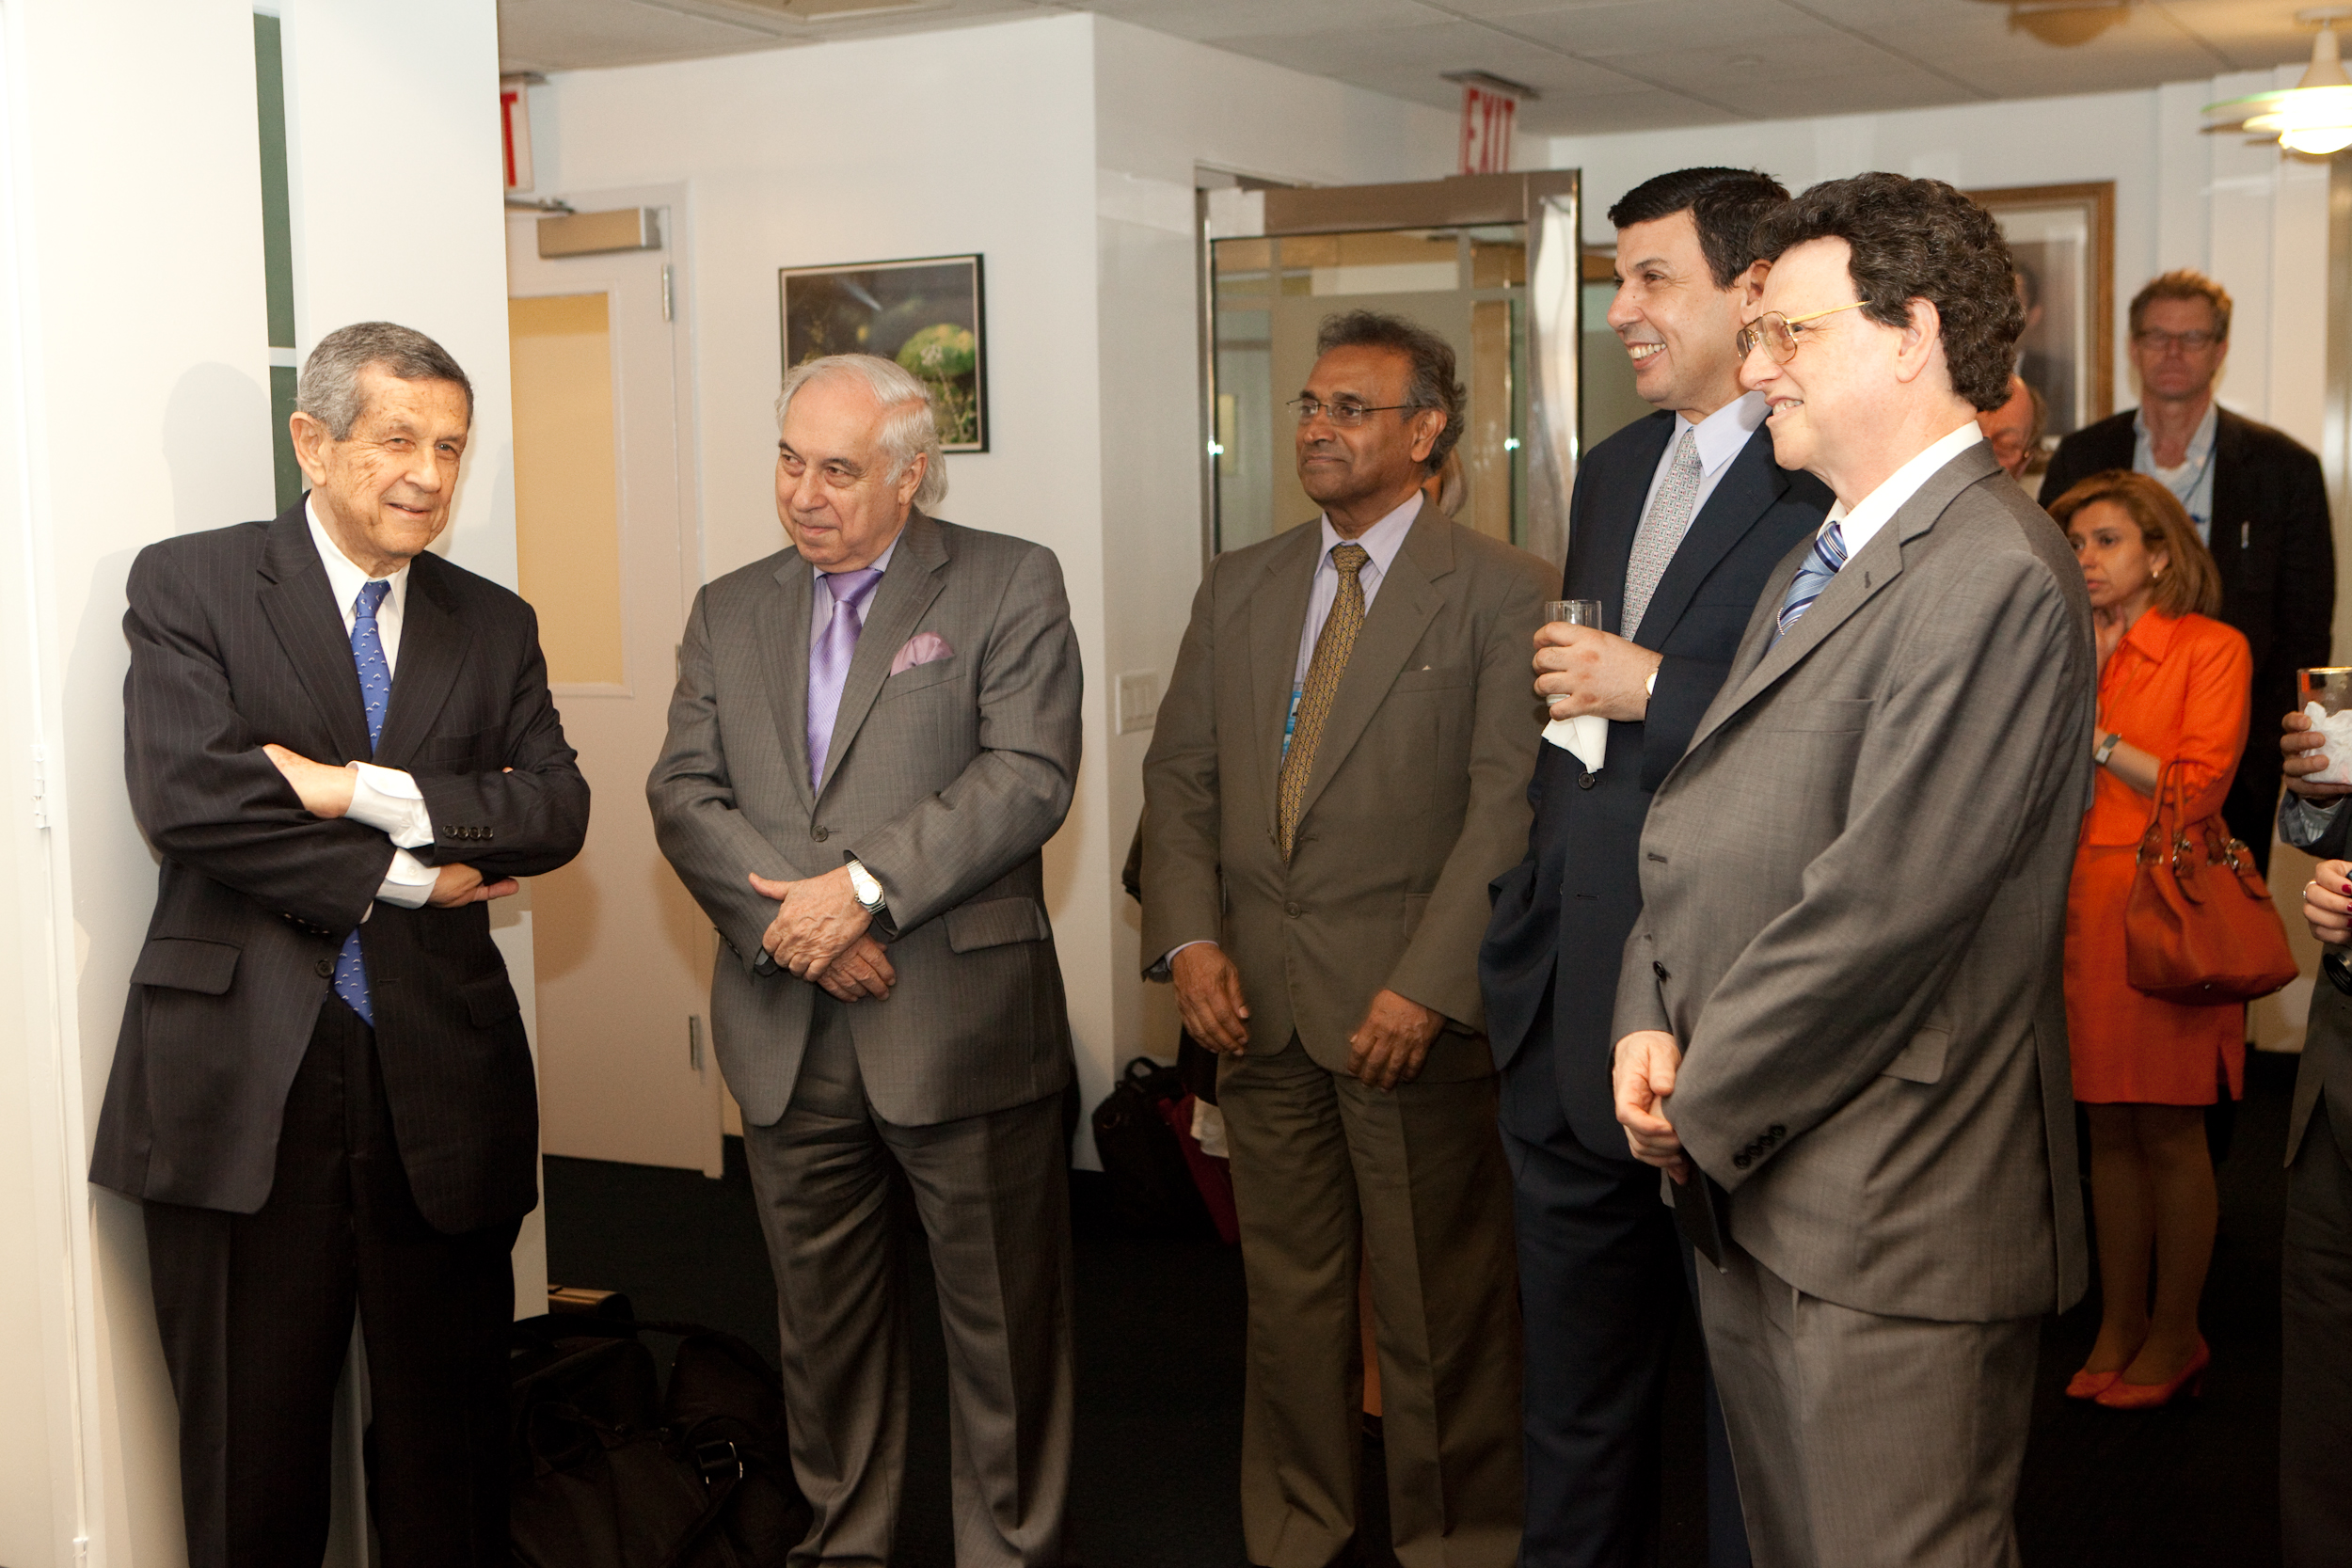 Ambassador Shaker on the occasion of the reissuing of his book in 2010. He is chatting with three other NPT Review Conference Presidents—Ambassadors Sergio Duarte, Jayantha Dhanapala, and Abdallah Baali—and Professor Potter (src: CNS)